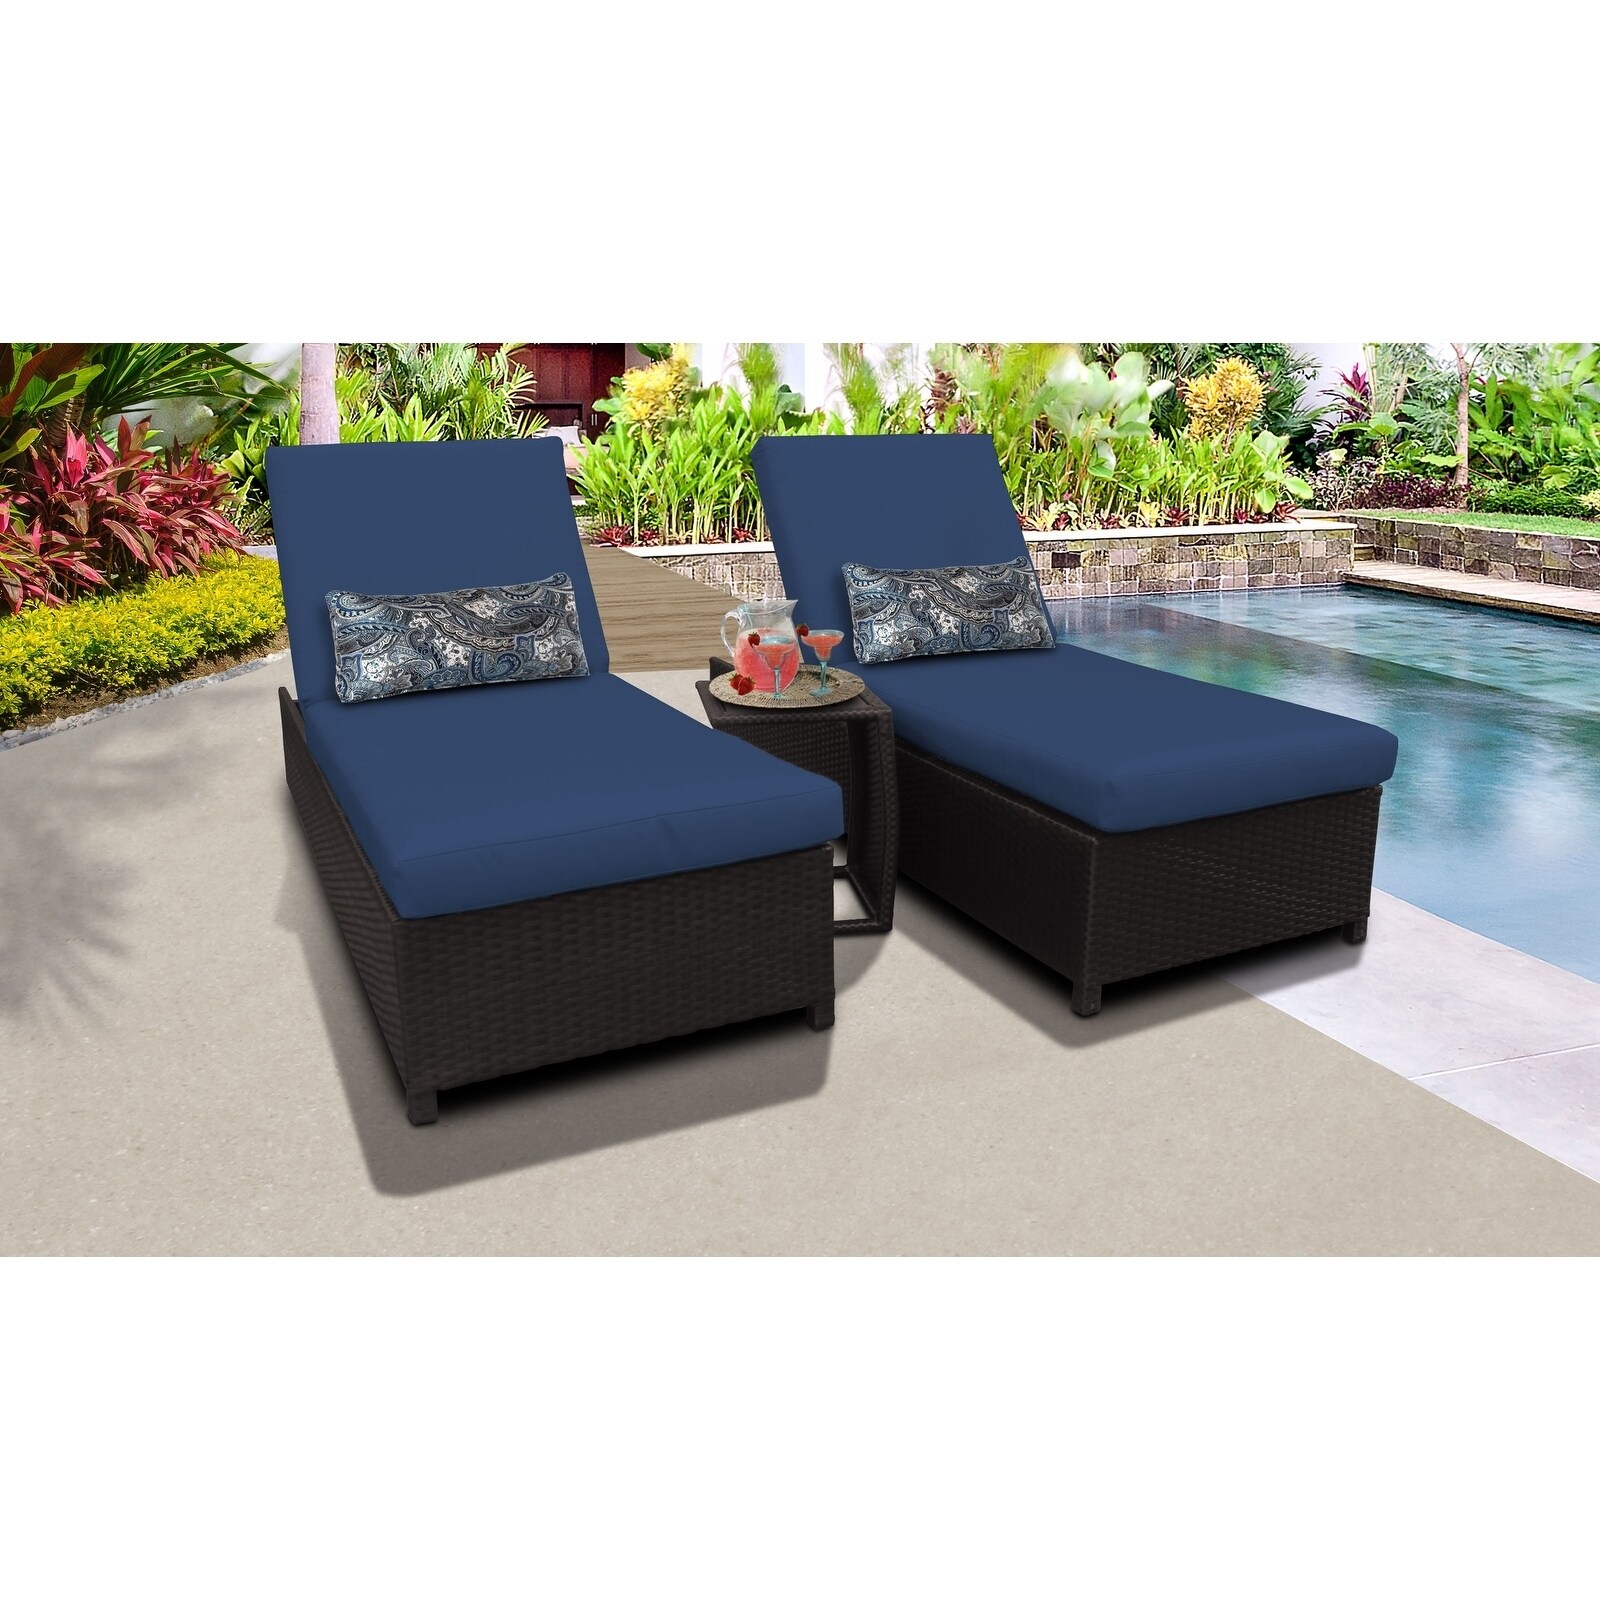 Barbados Wheeled Chaise Set Of 2 Outdoor Wicker Patio Furniture And Side Table